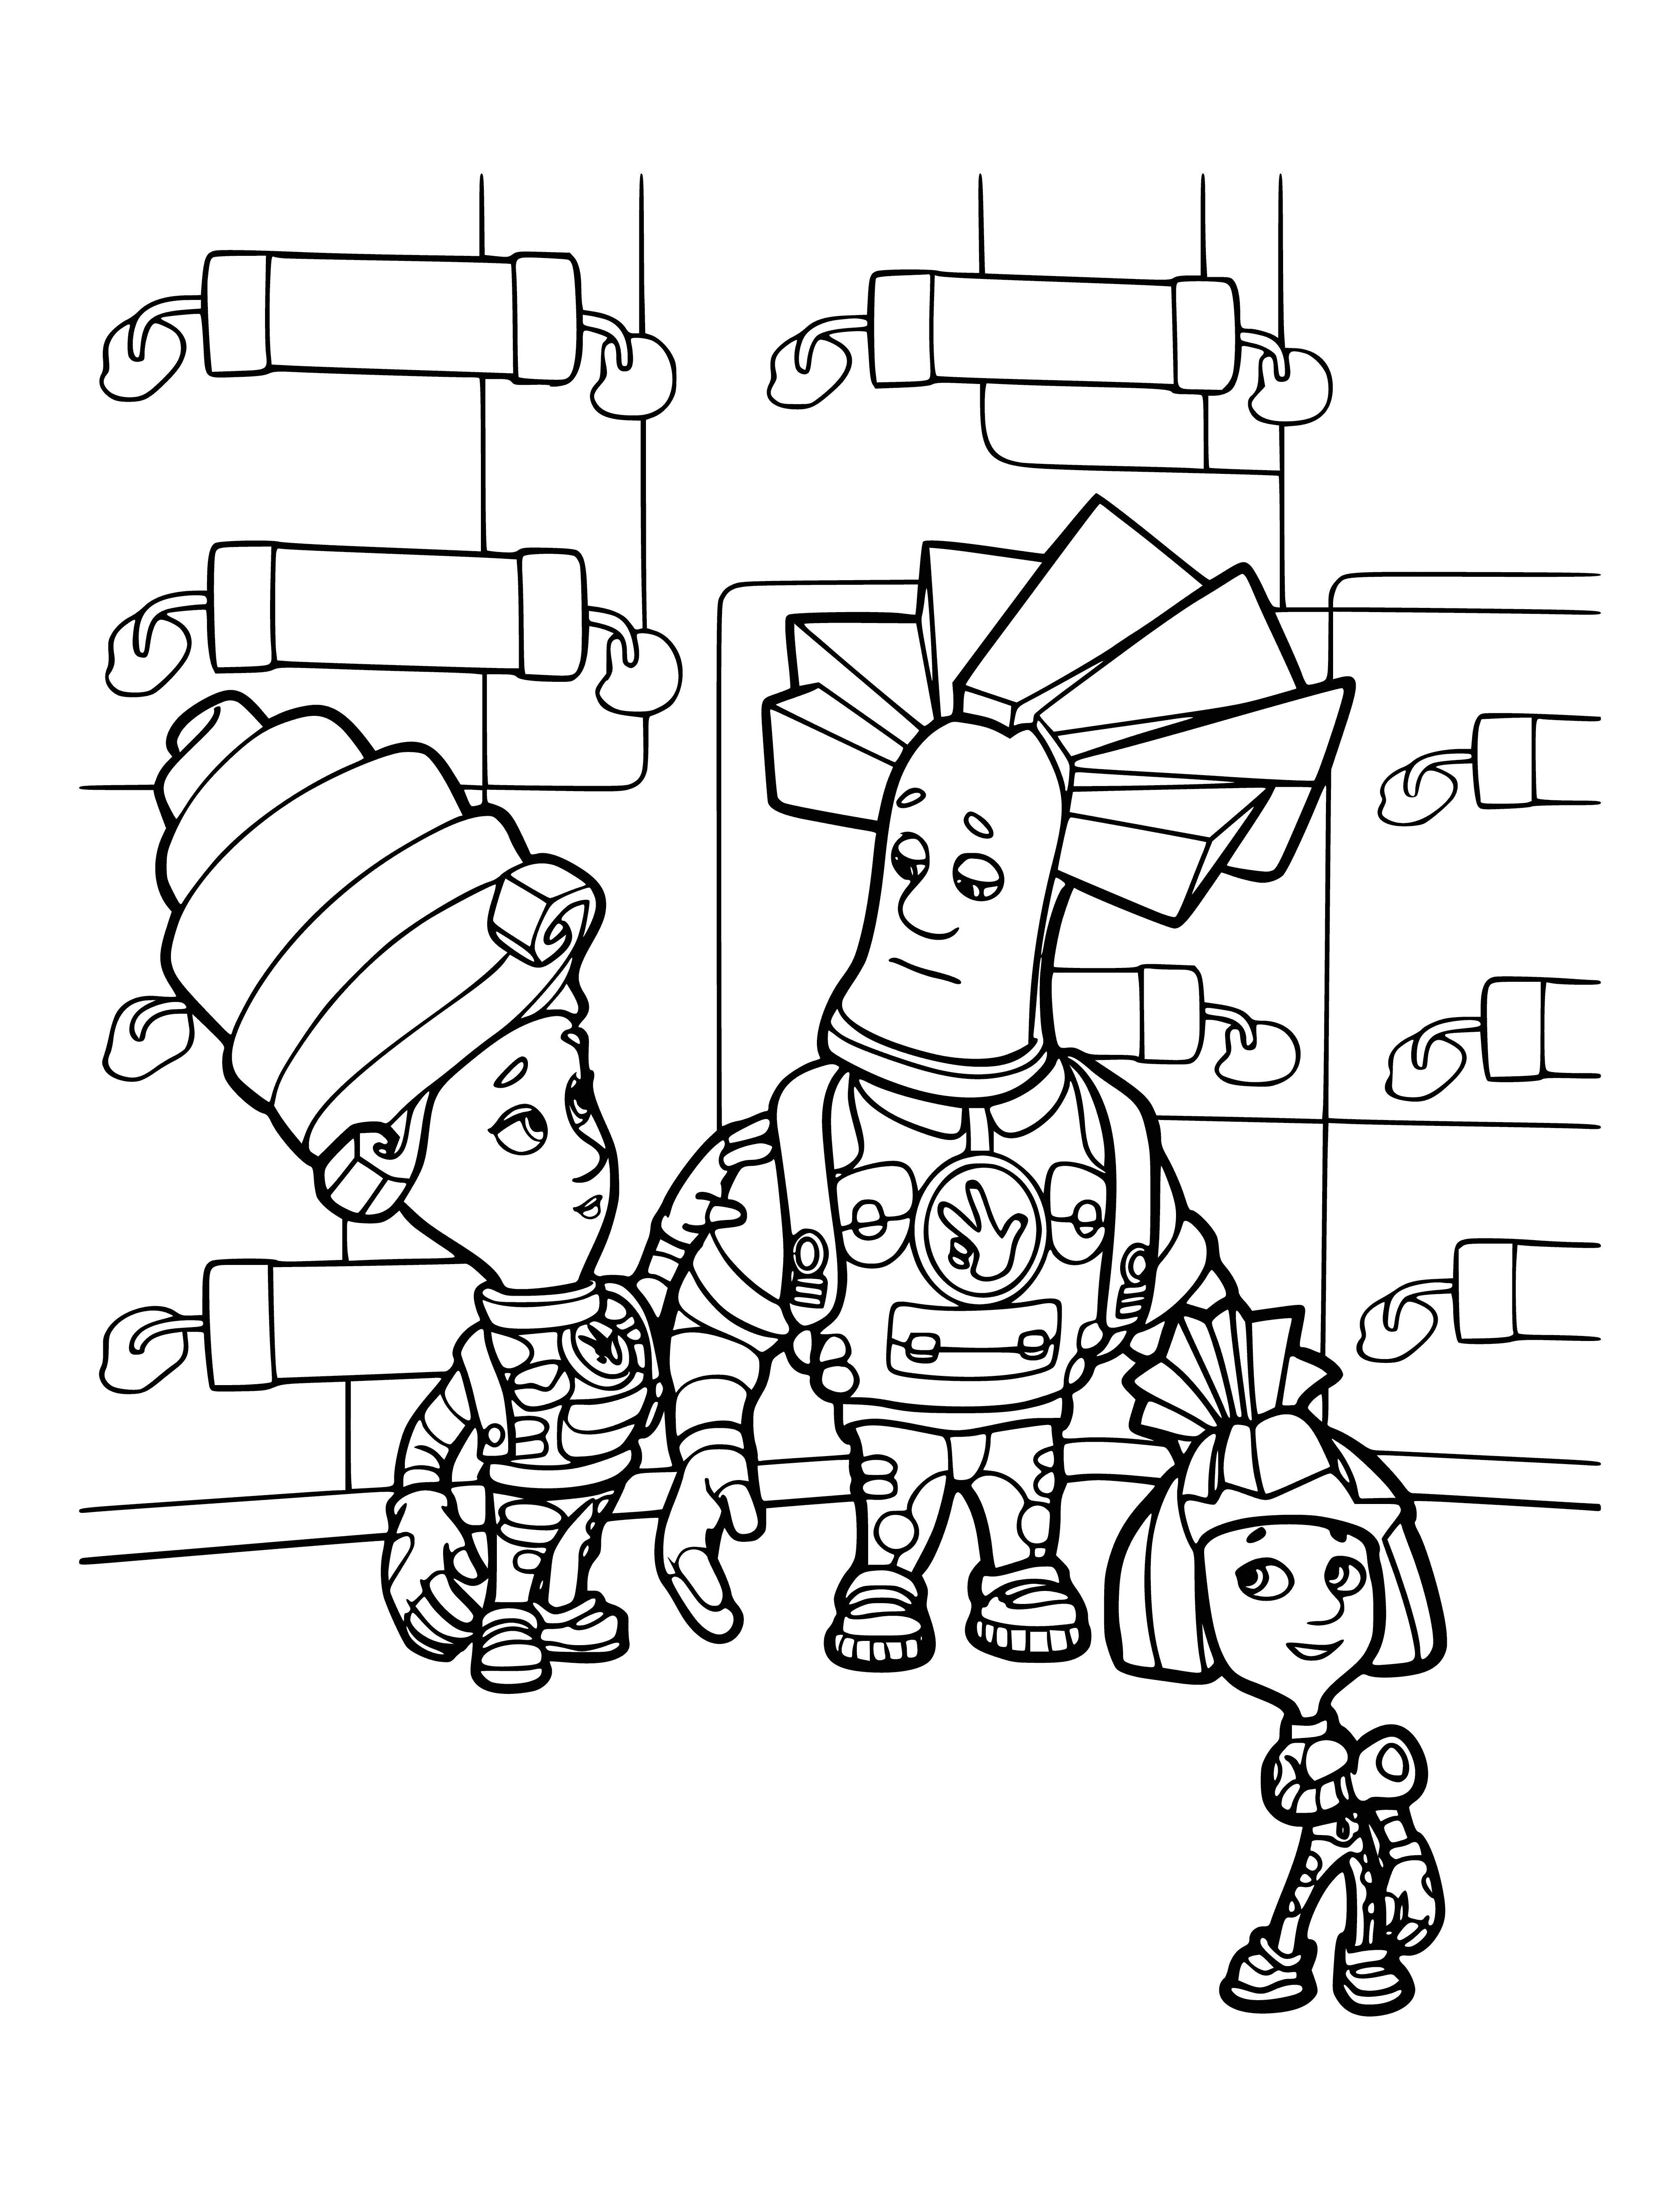 coloring page: Three cartoon characters with big eyes; green/brown, purple/blue, pink/blonde; wearing yellow, red, and blue shirts respectively; all with black button eyes. #coloringpage